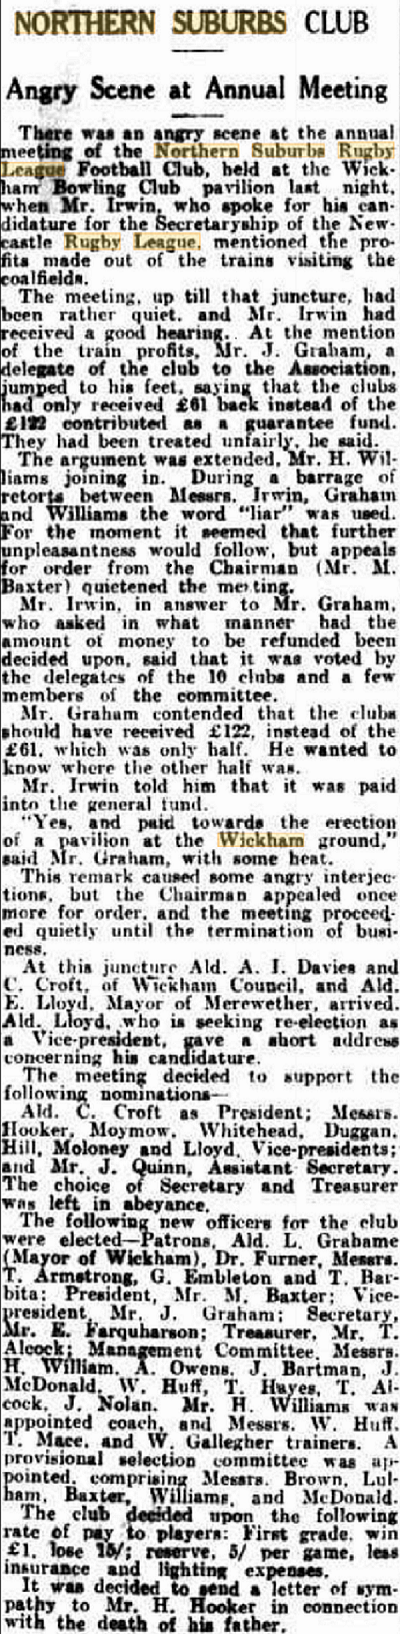 Angry scenes at Meeting 1934.